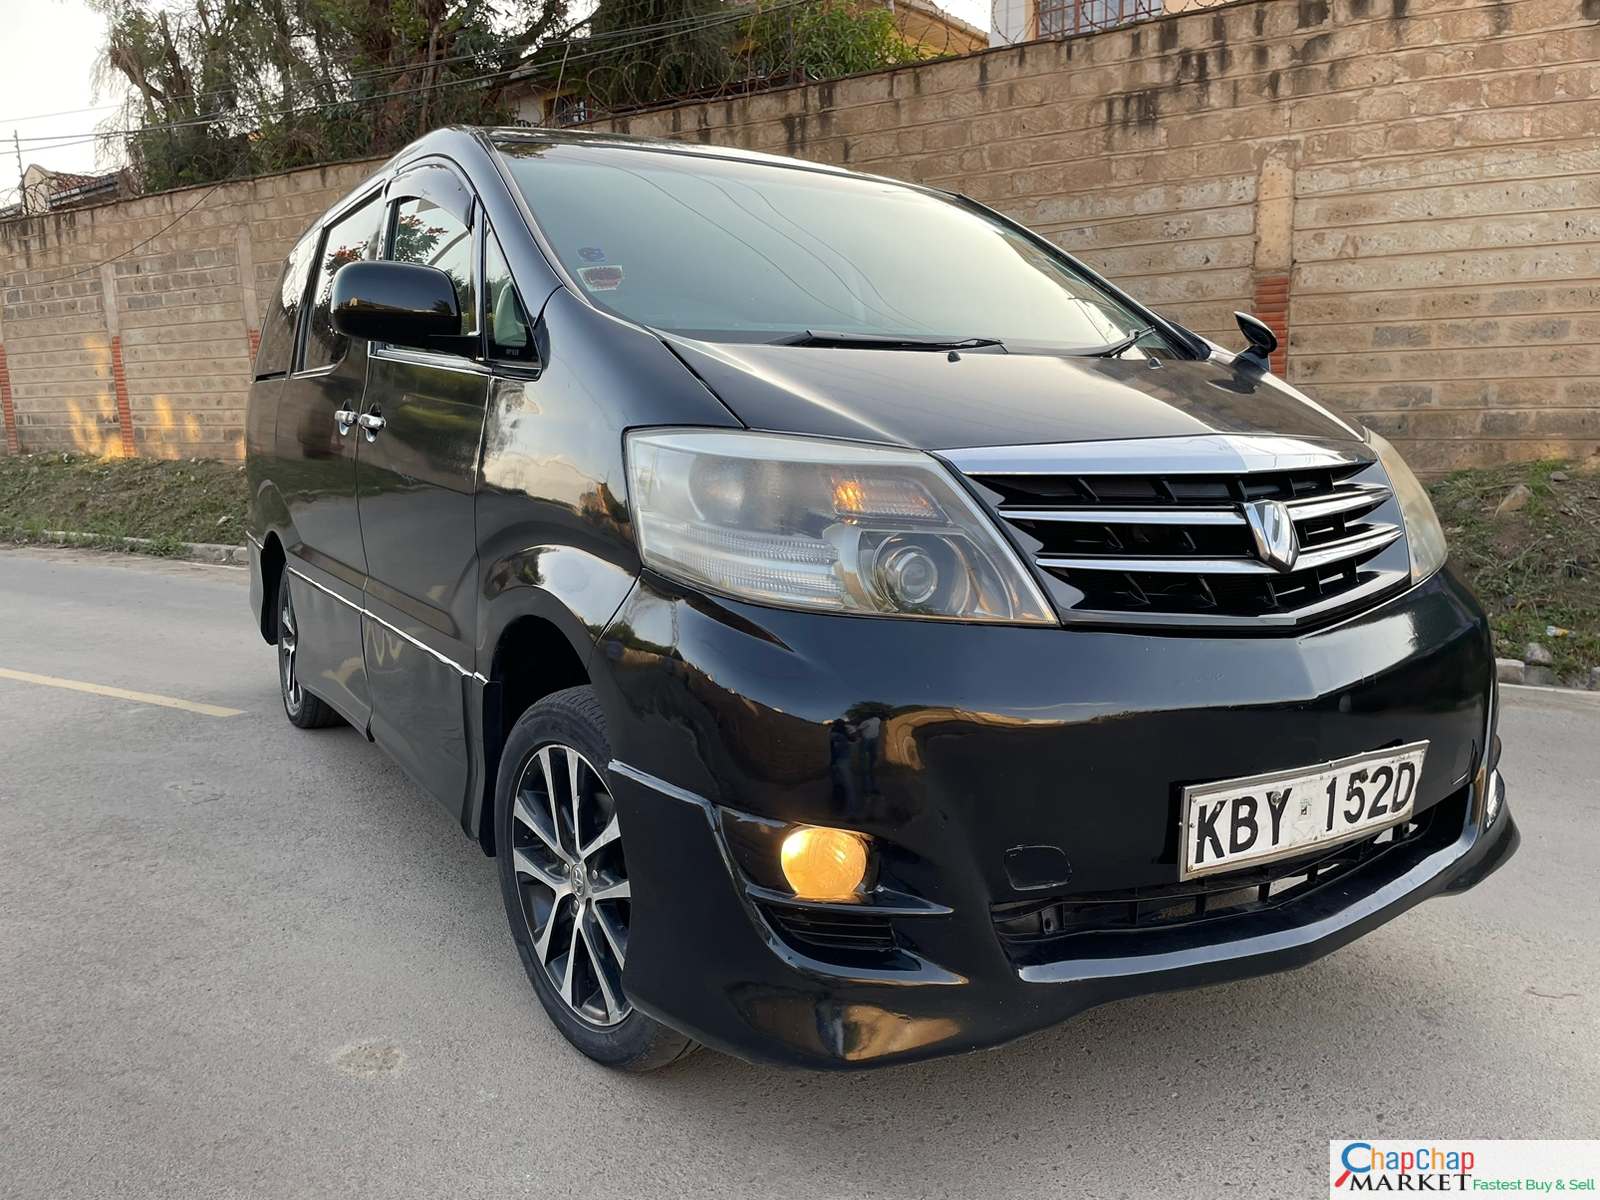 Toyota Alphard 850k ONLY You Pay 30% Deposit Trade in OK EXCLUSIVE